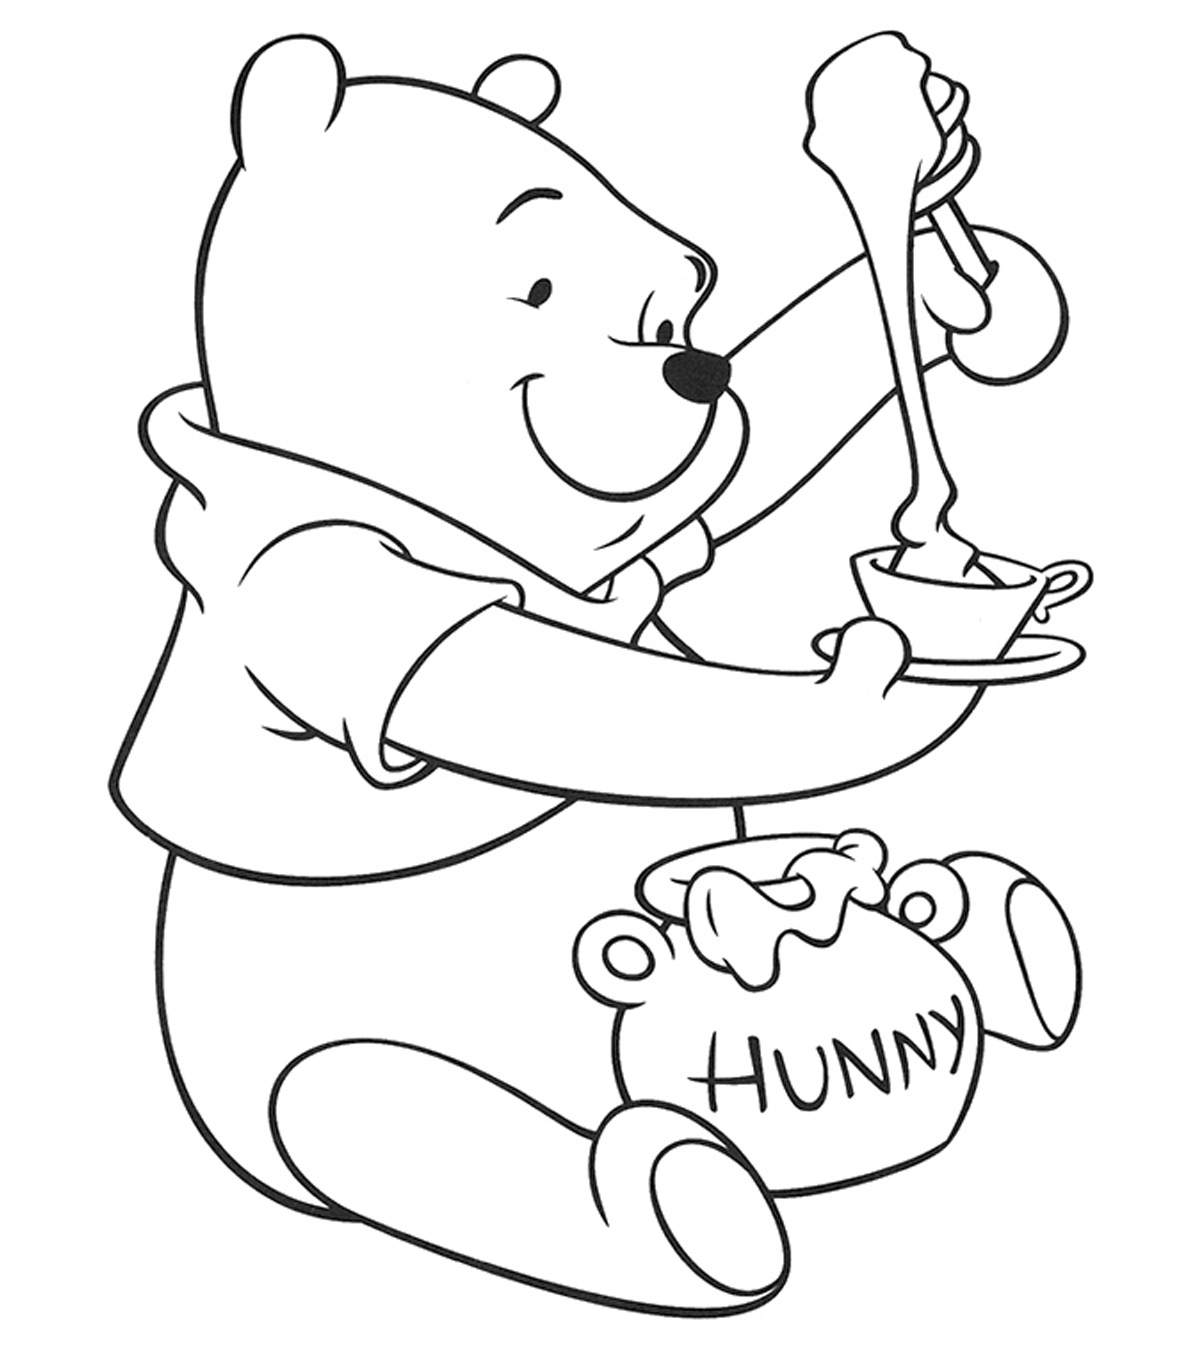 52 Coloring Pages For Bears Images & Pictures In HD